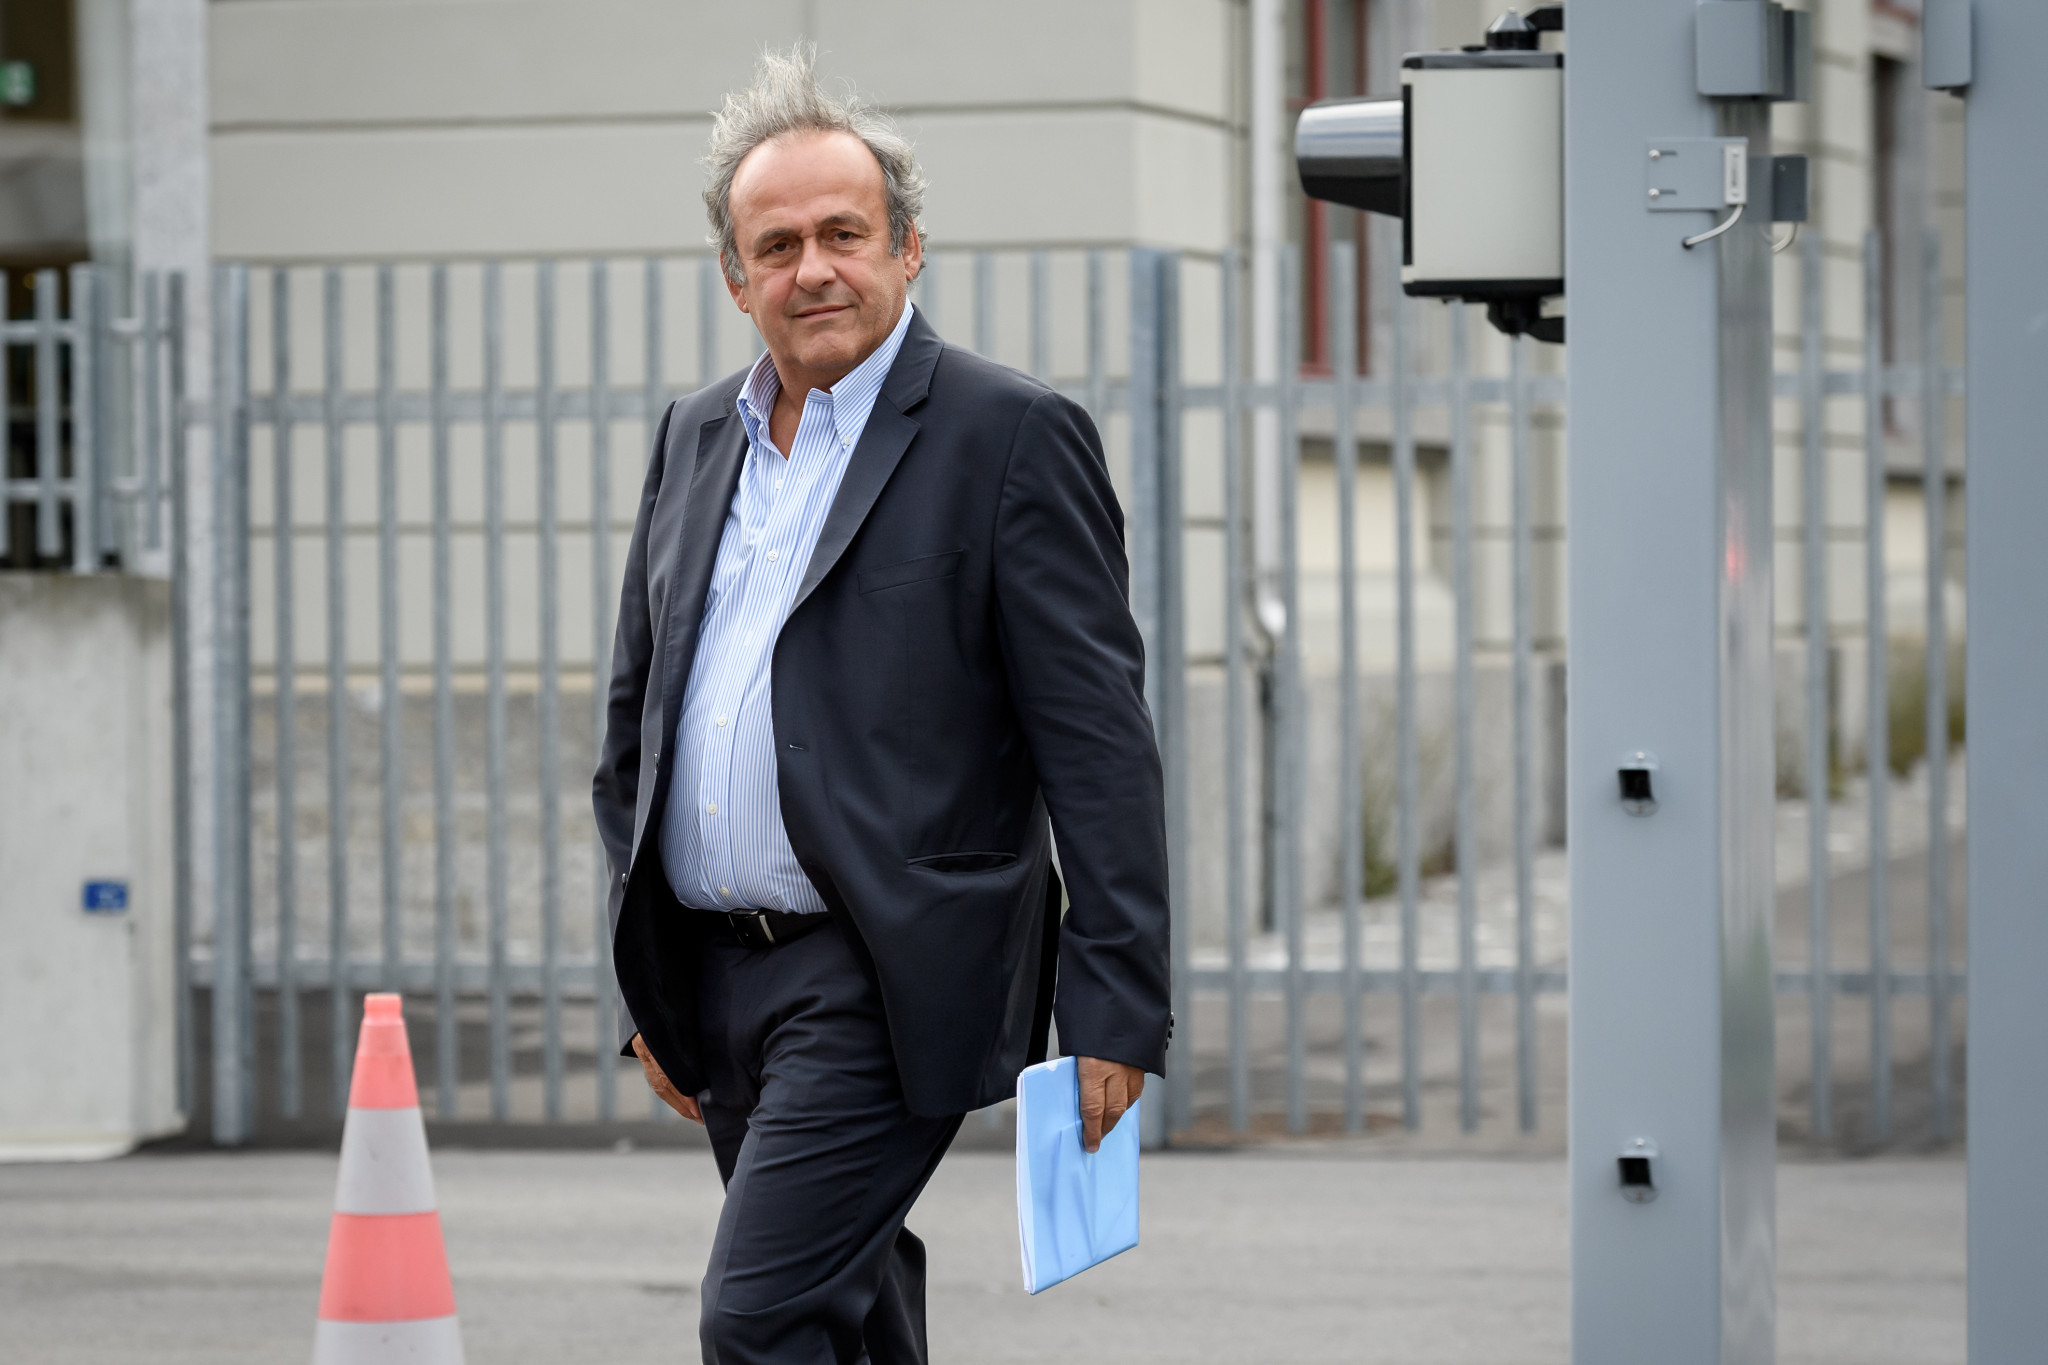 Former UEFA President Michel Platini was also questioned by Swiss prosecutors ©Getty Images